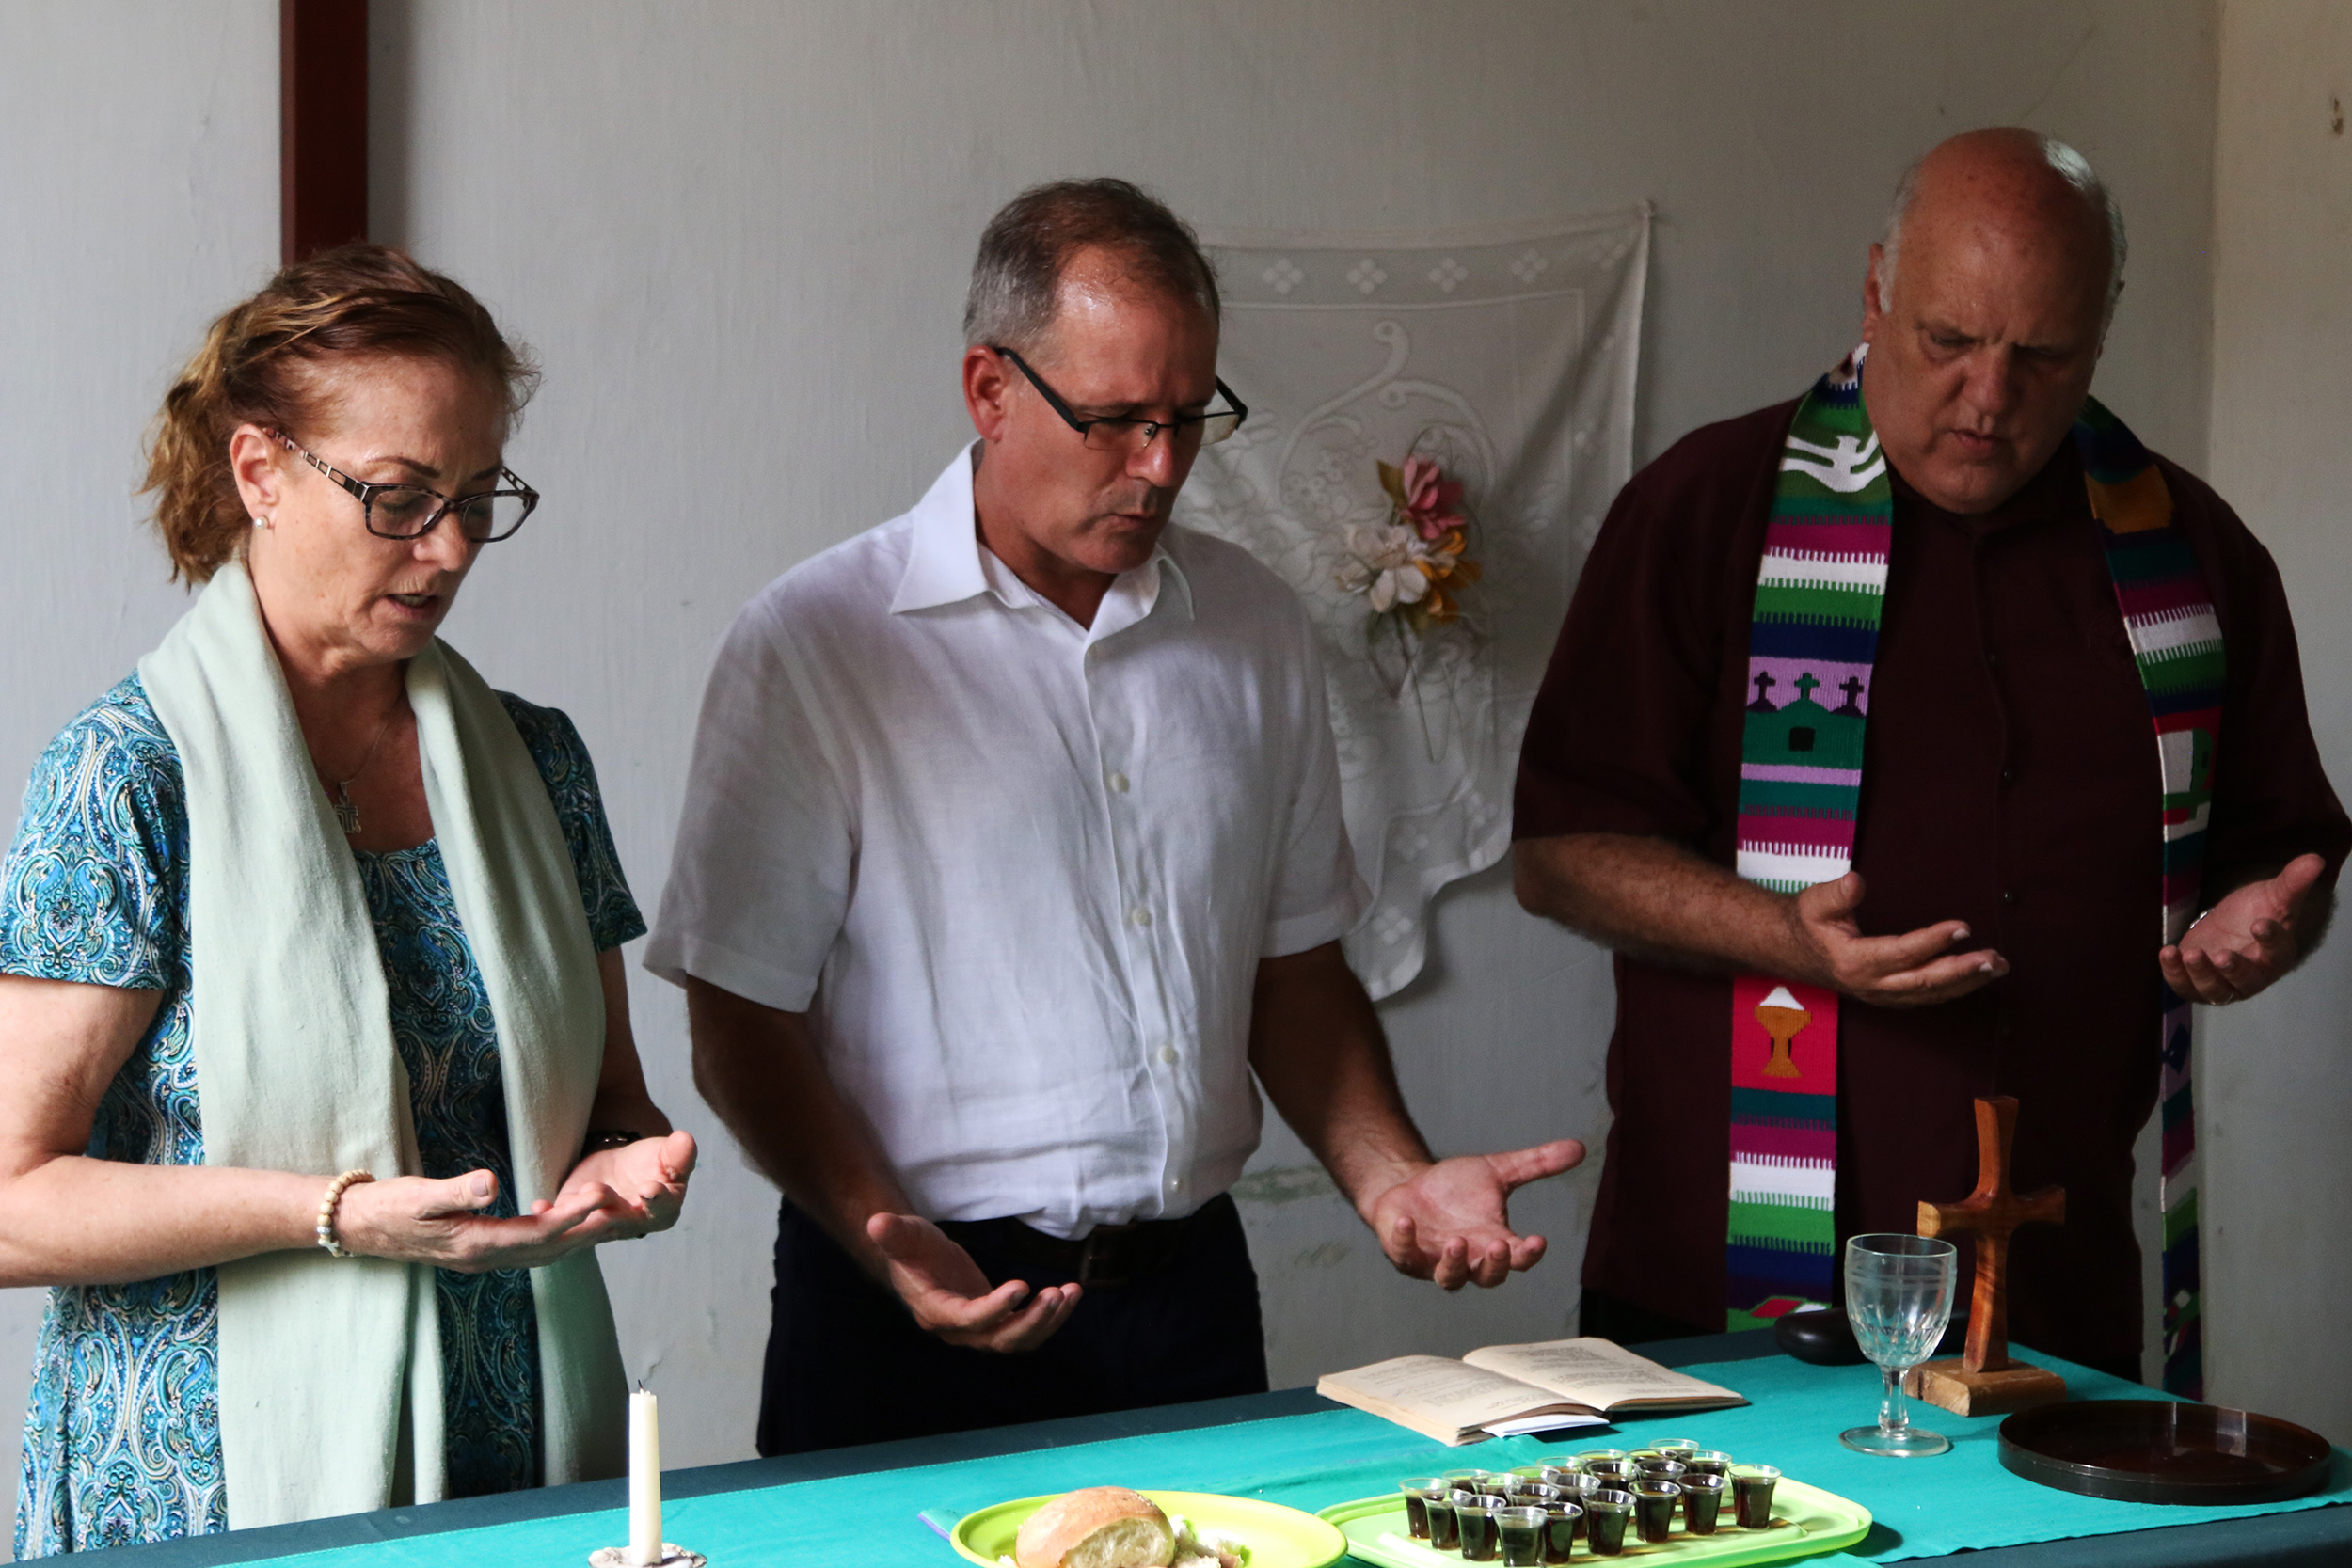 Jo Ella Holman (left), Ary Fernandez (center) and Edelberto Valdes (right) officiate for the Sacrament of the Lord’s Supper at Camagüey Mission.